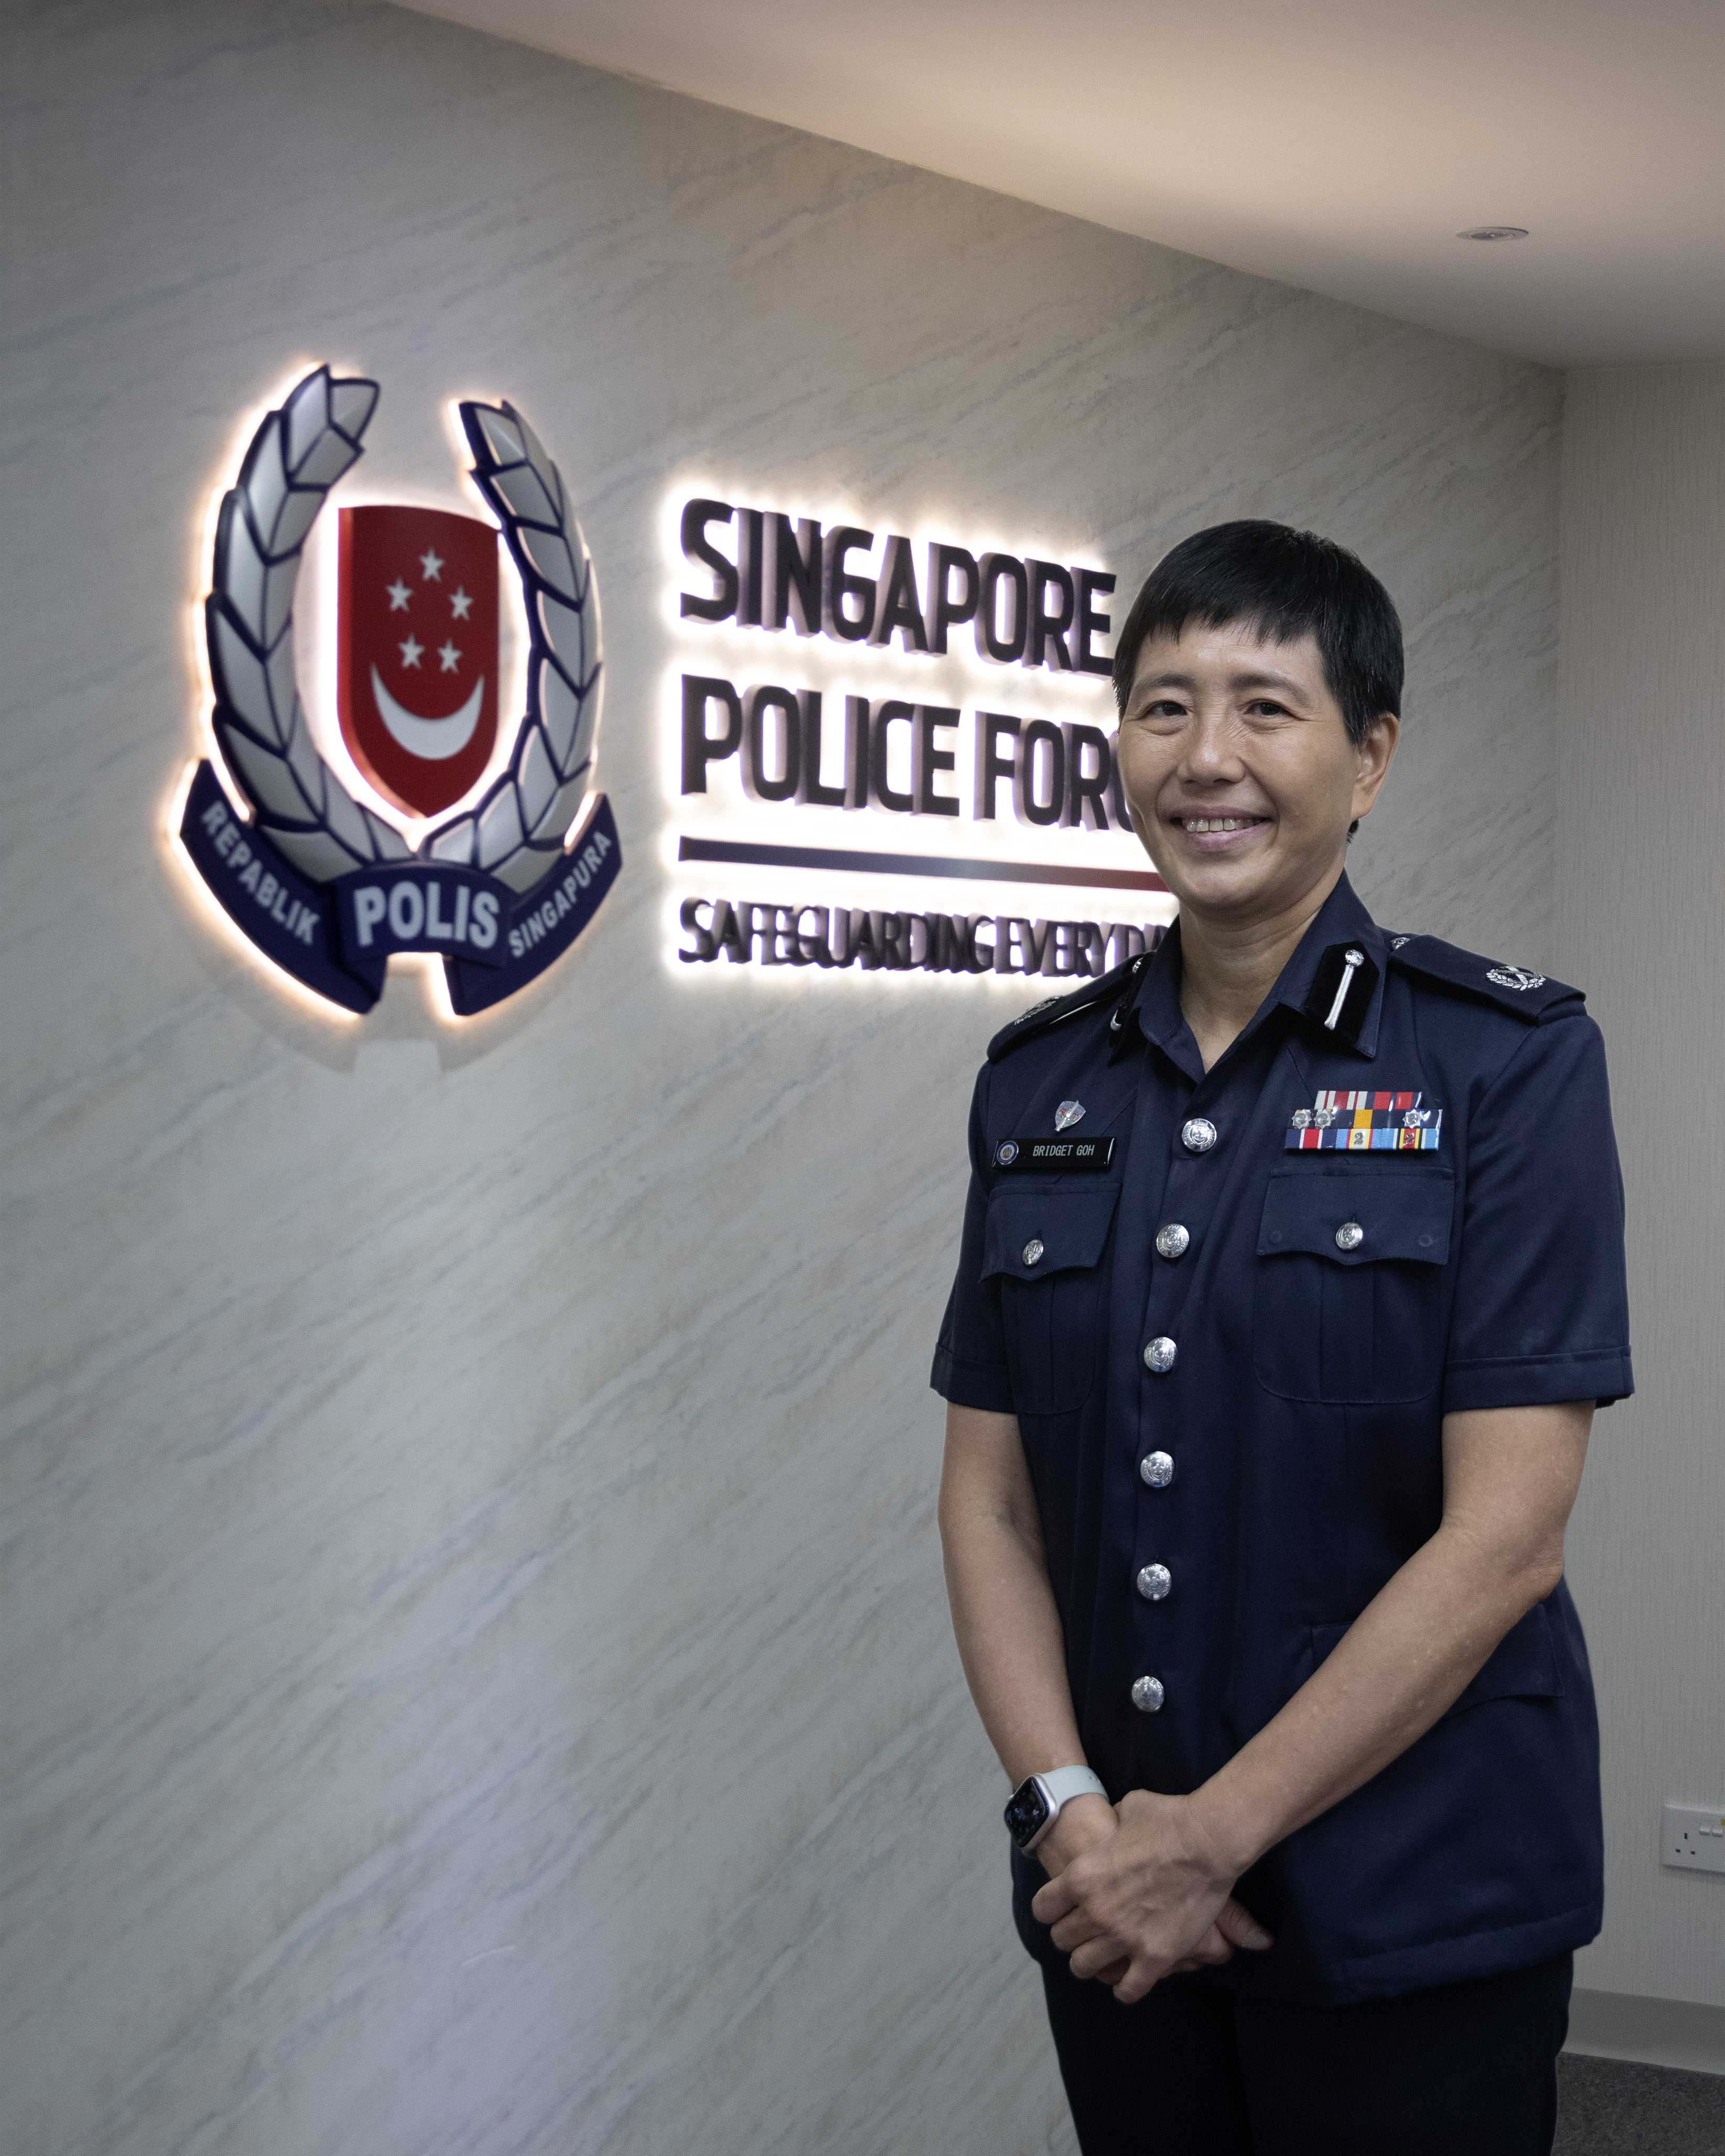 With dedication and resilience, DAC Bridget Goh has served in the SPF for 32 years. PHOTO: Rose Maswida